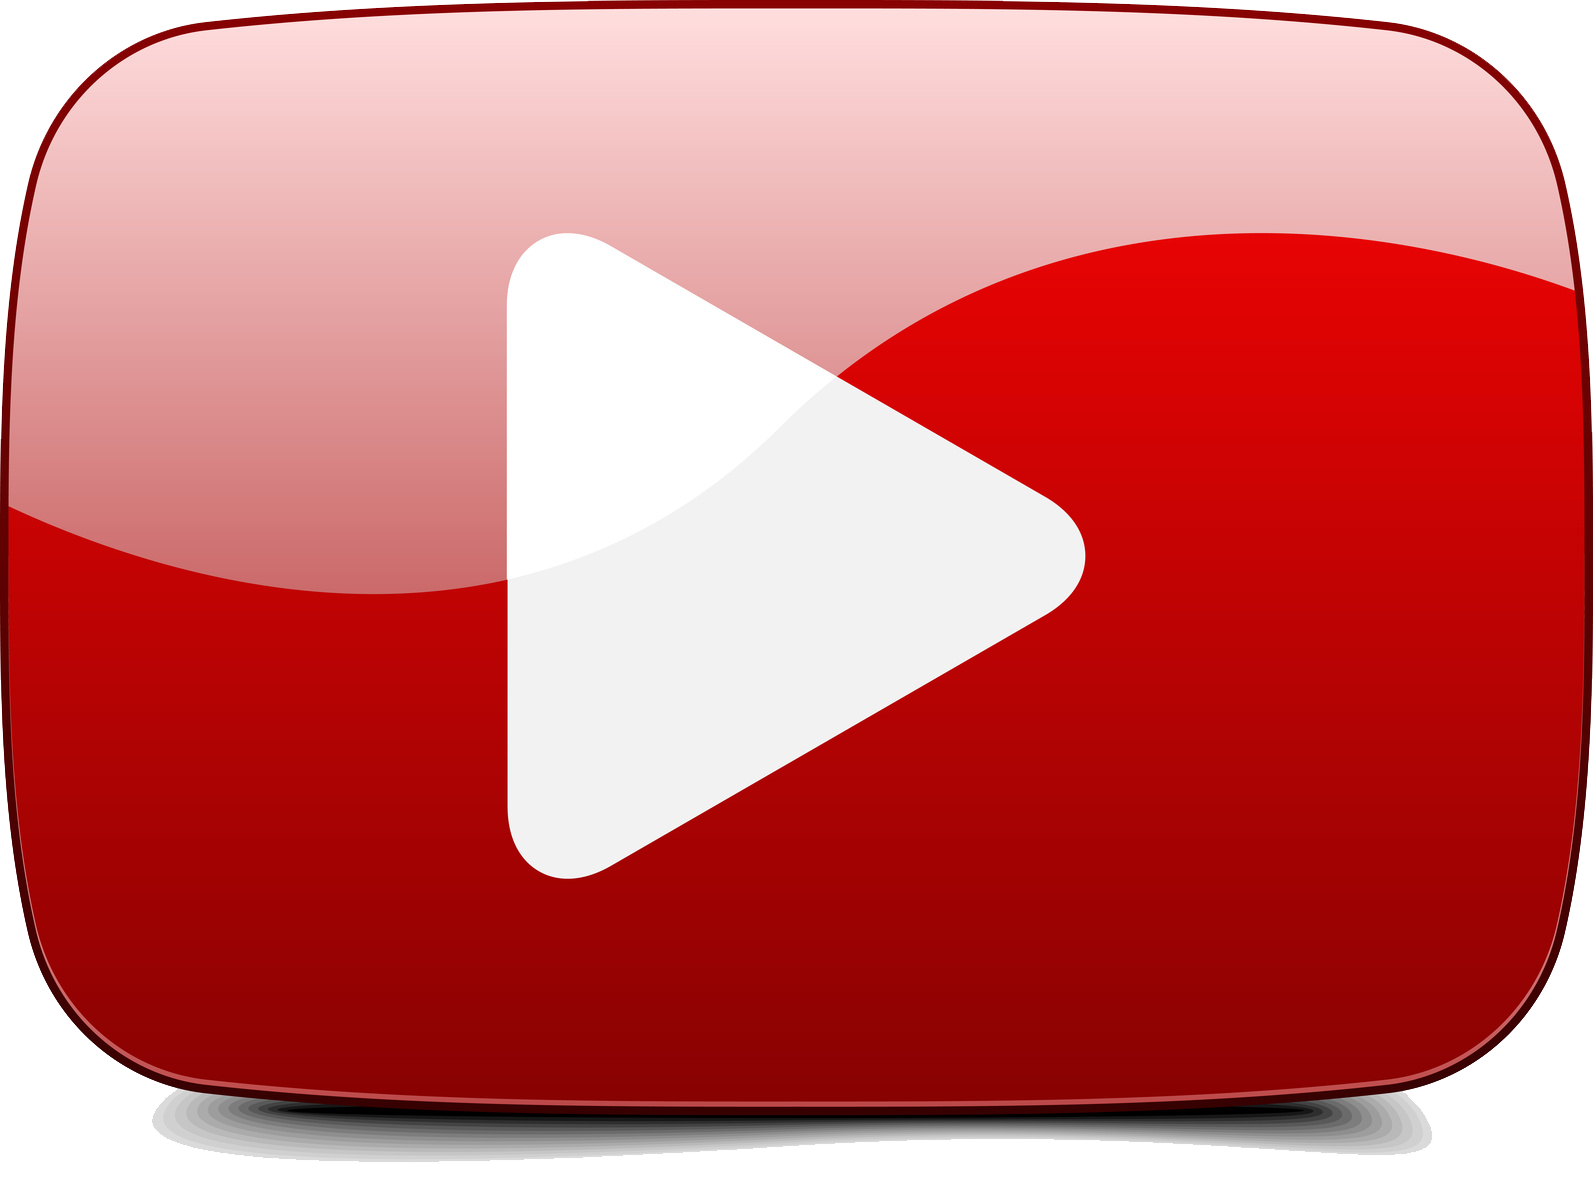 Youtube Red Play Button Hd Glossy Icon 10 